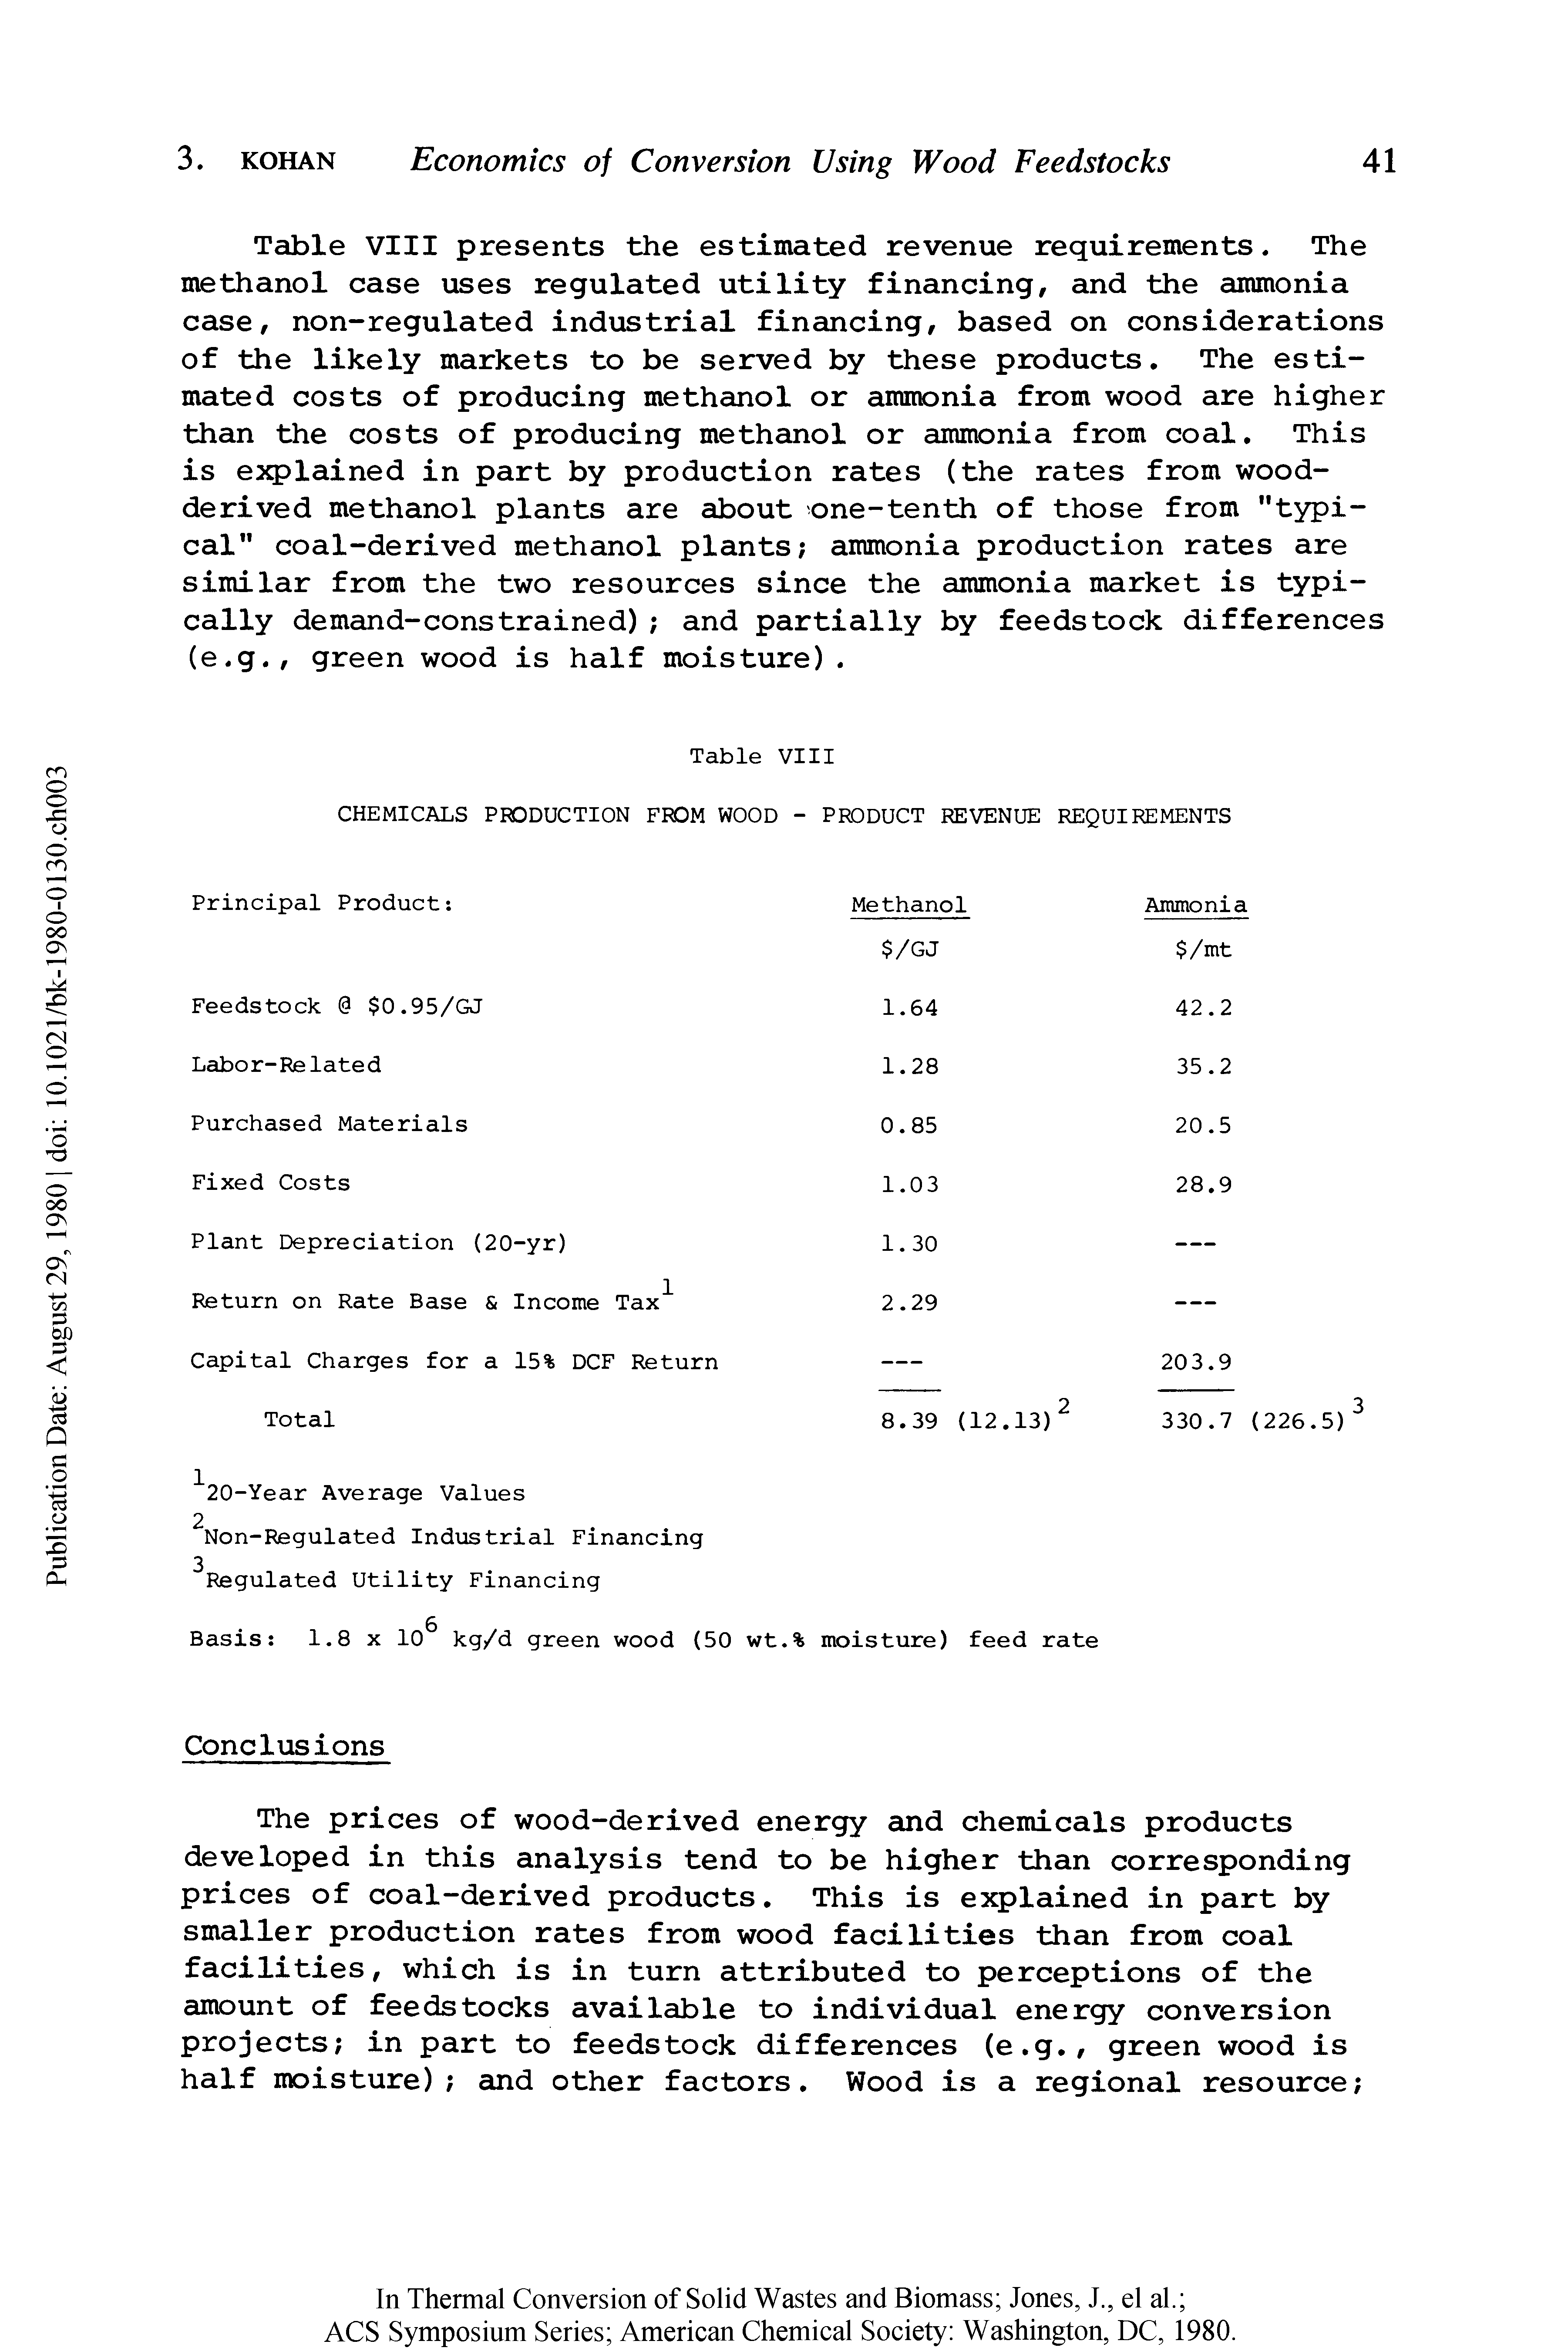 Table VIII presents the estimated revenue requirements. The methanol case uses regulated utility financing, and the ammonia case, non-regulated industrial financing, based on considerations of the likely markets to be served by these products. The estimated costs of producing methanol or ammonia from wood are higher than the costs of producing methanol or ammonia from coal. This is ejqplained in part by production rates (the rates from wood-derived methanol plants are about one-tenth of those from "typical" coal-derived methanol plants ammonia production rates are similar from the two resources since the ammonia market is typically demand-constrained) and partially by feedstock differences (e.g., green wood is half moisture).